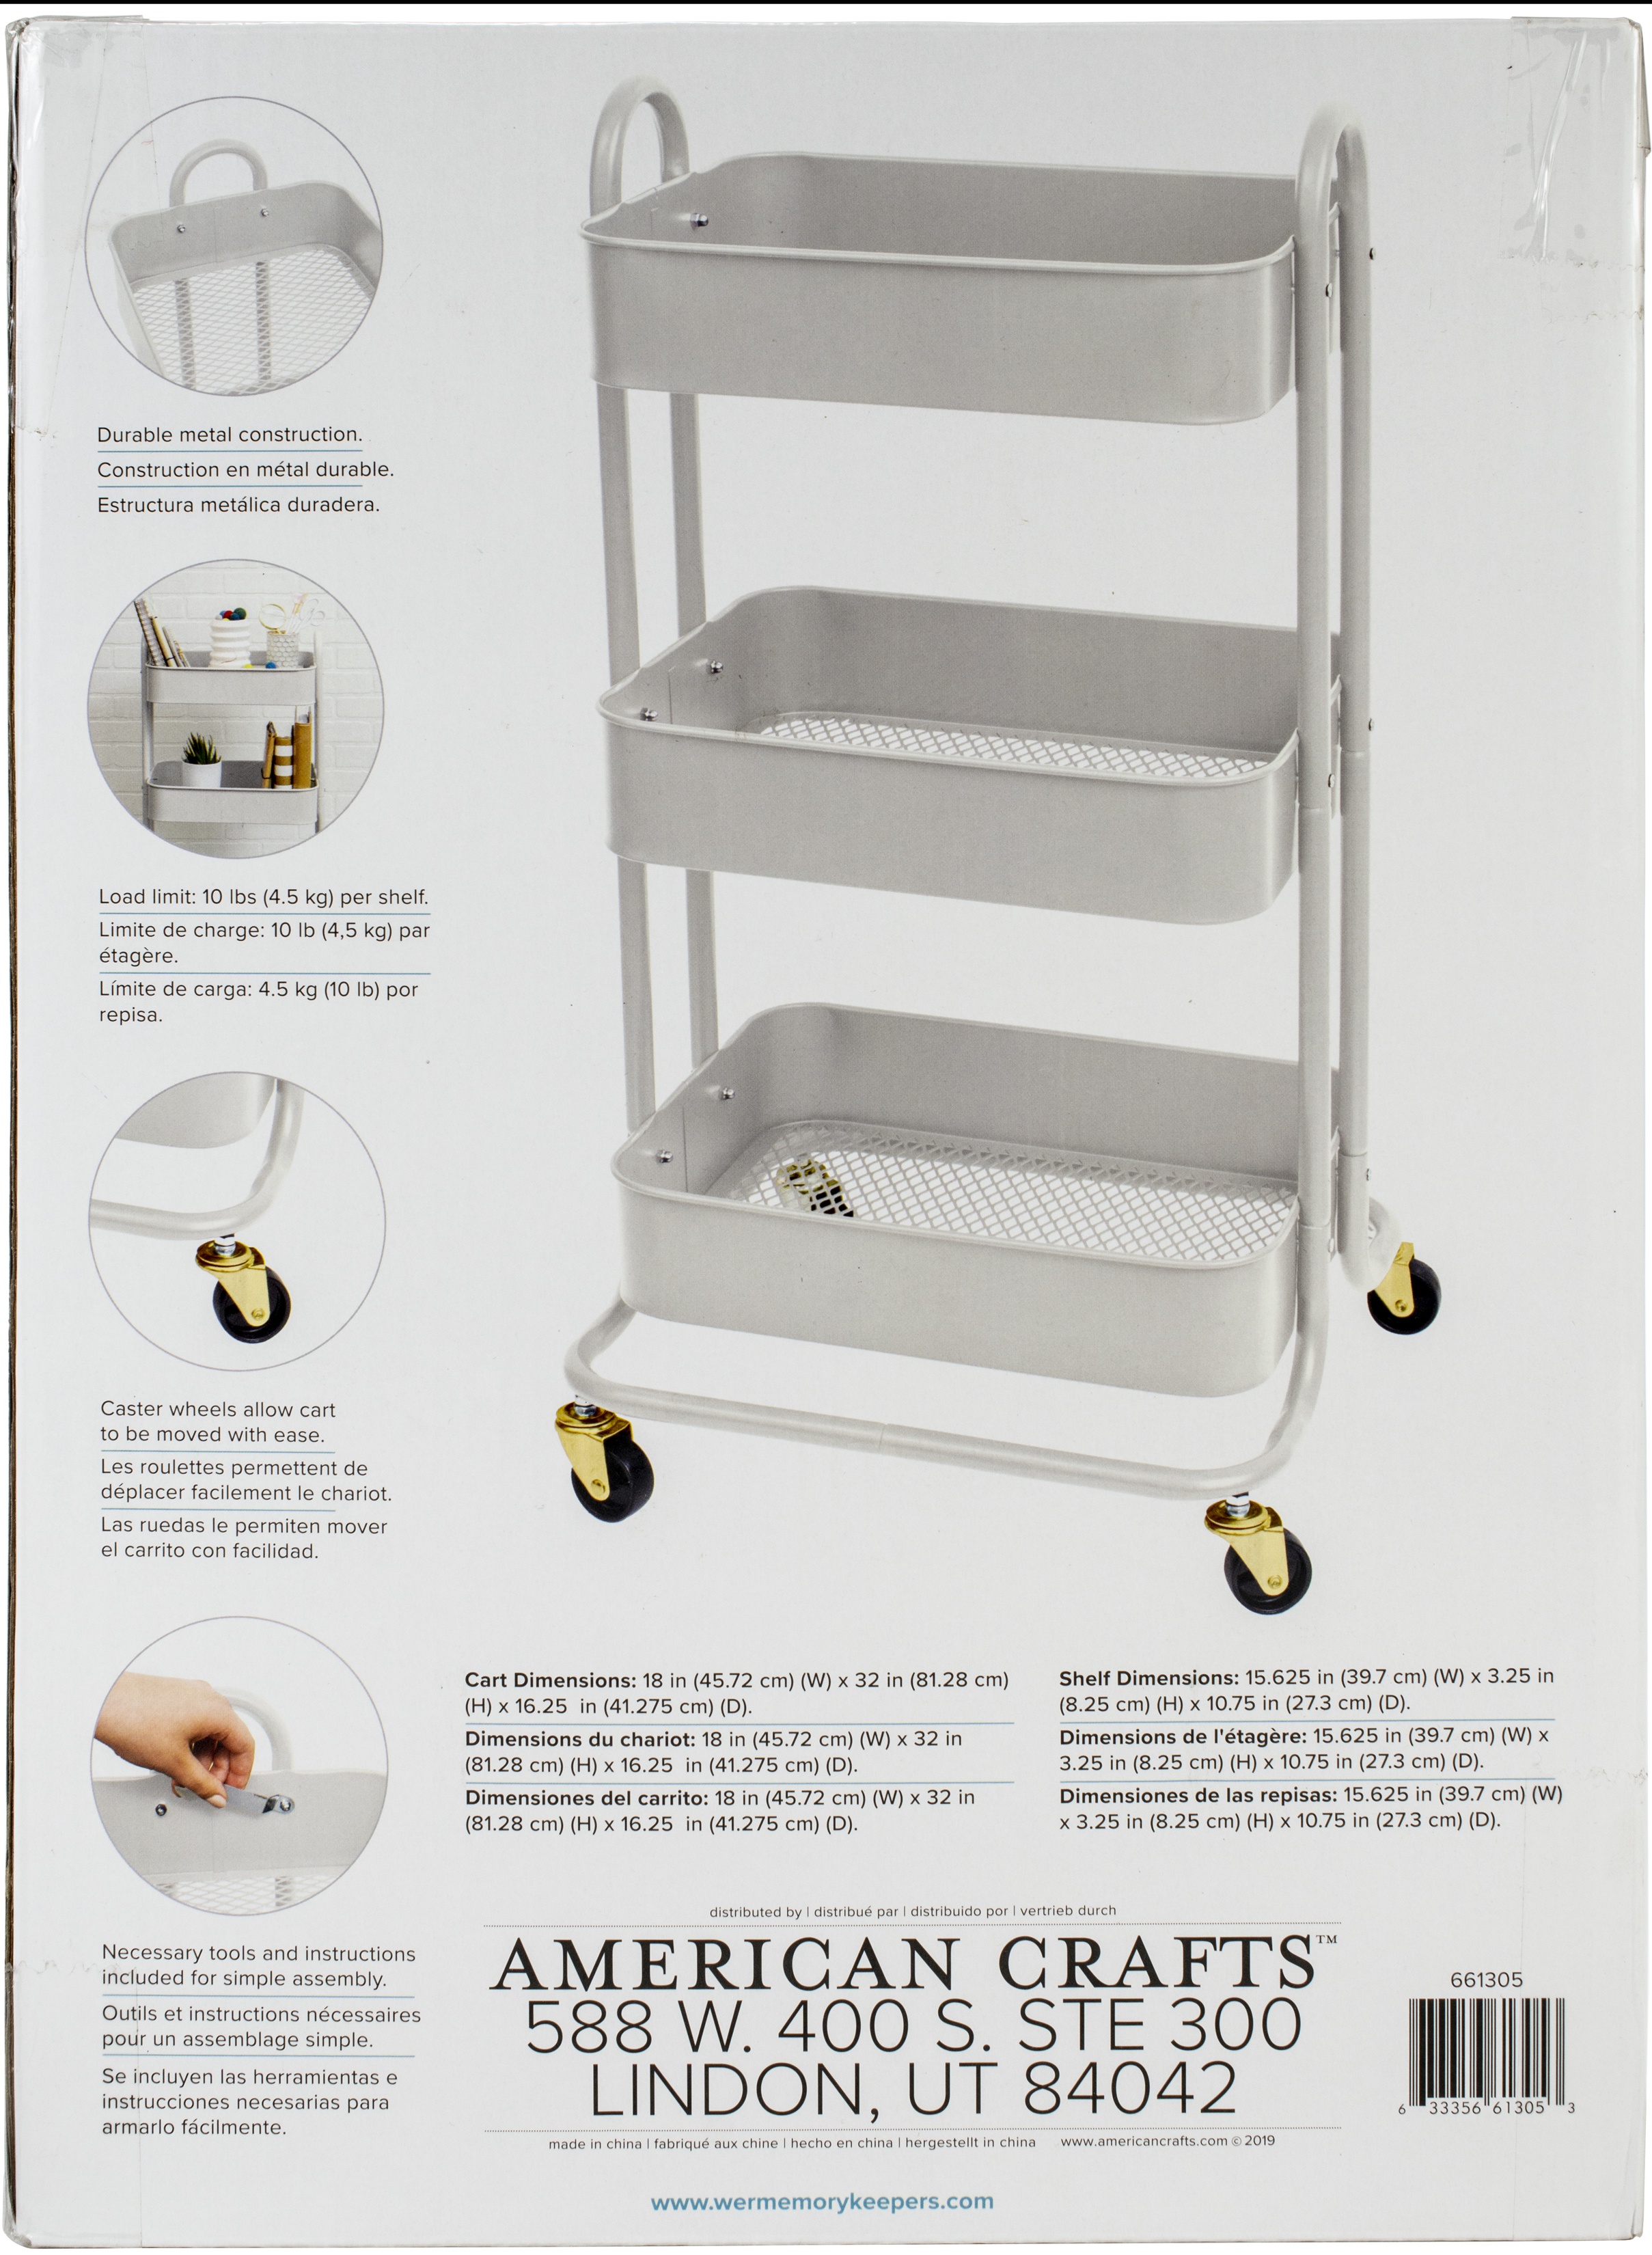 3-Tier Steel Rolling Storage Cart, 36 1/2" x 17" x 17", With Handles, Off White - image 3 of 4